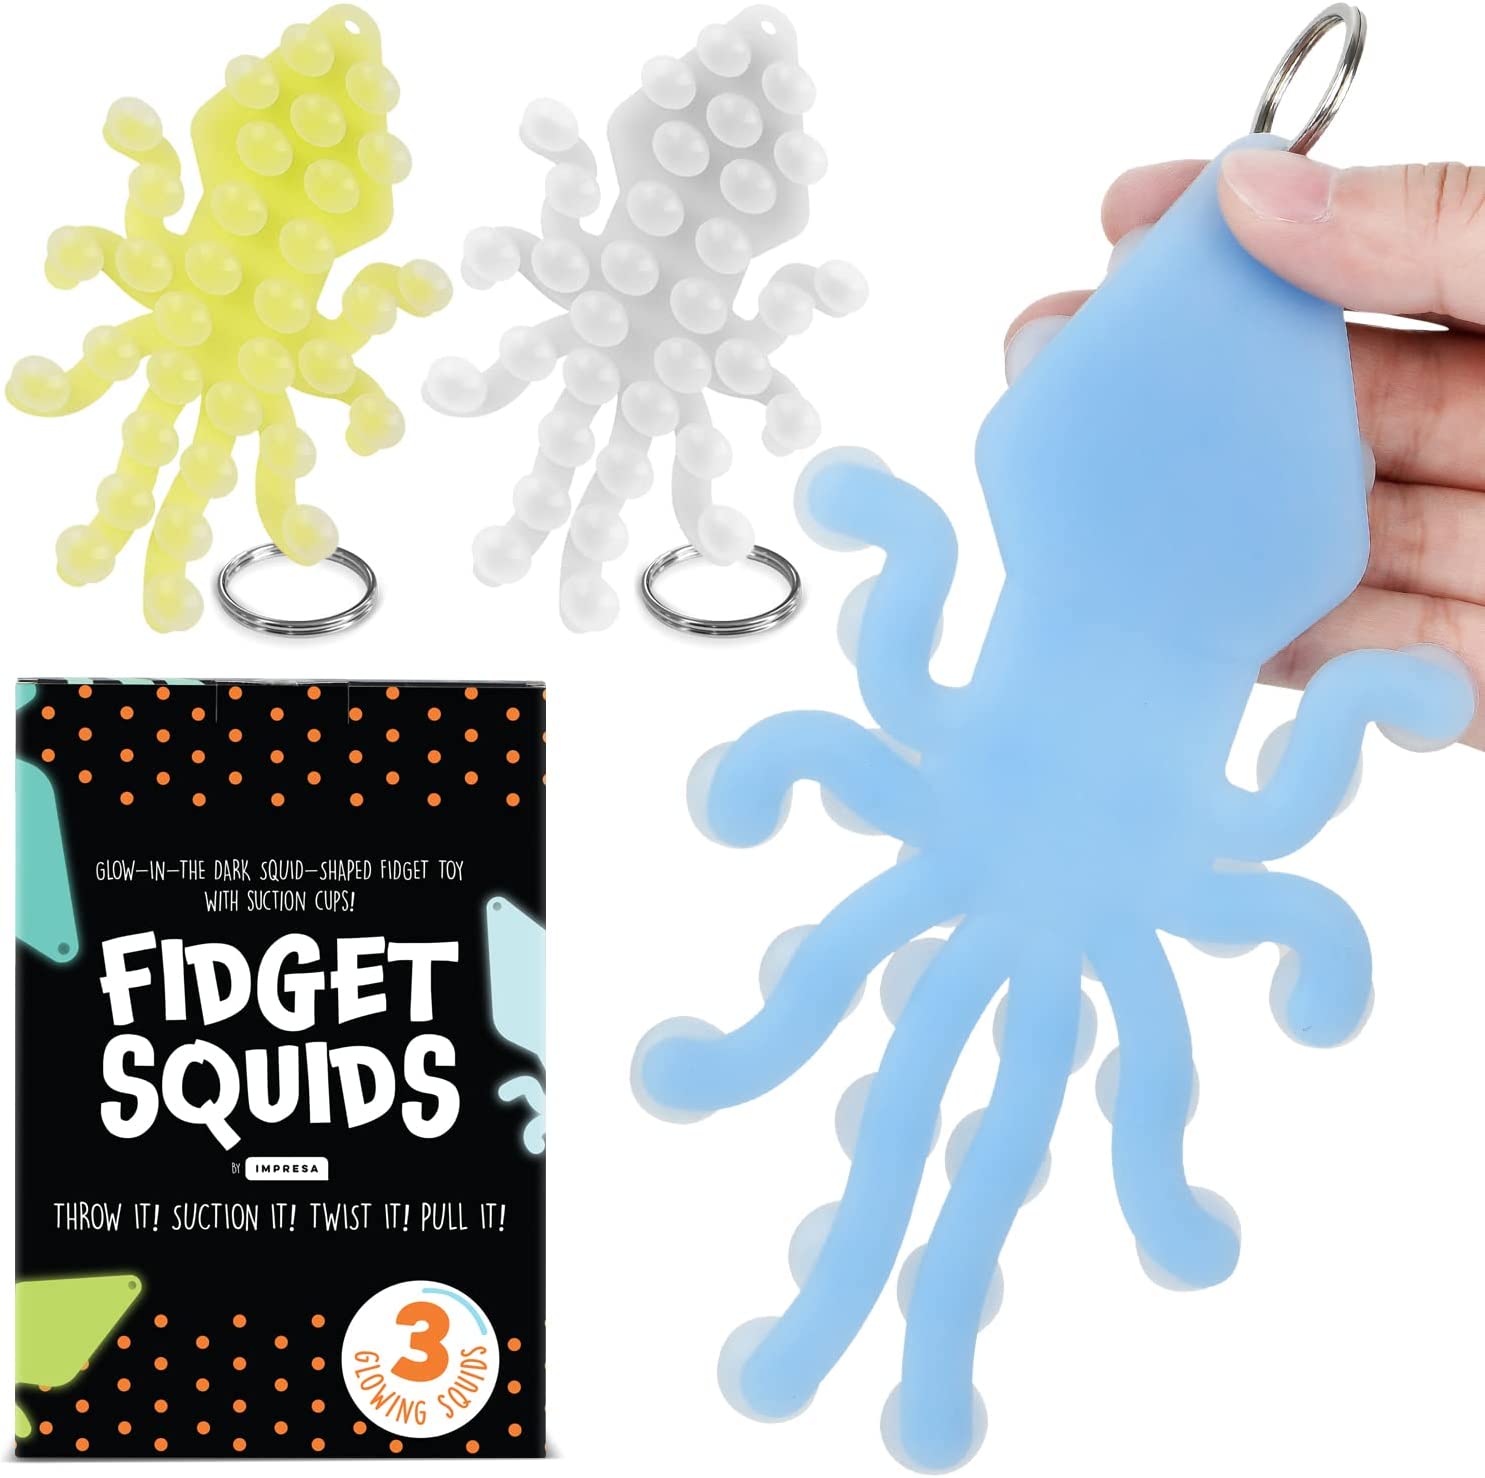 glow-in-the-dark sensory fidget toys with suction cups